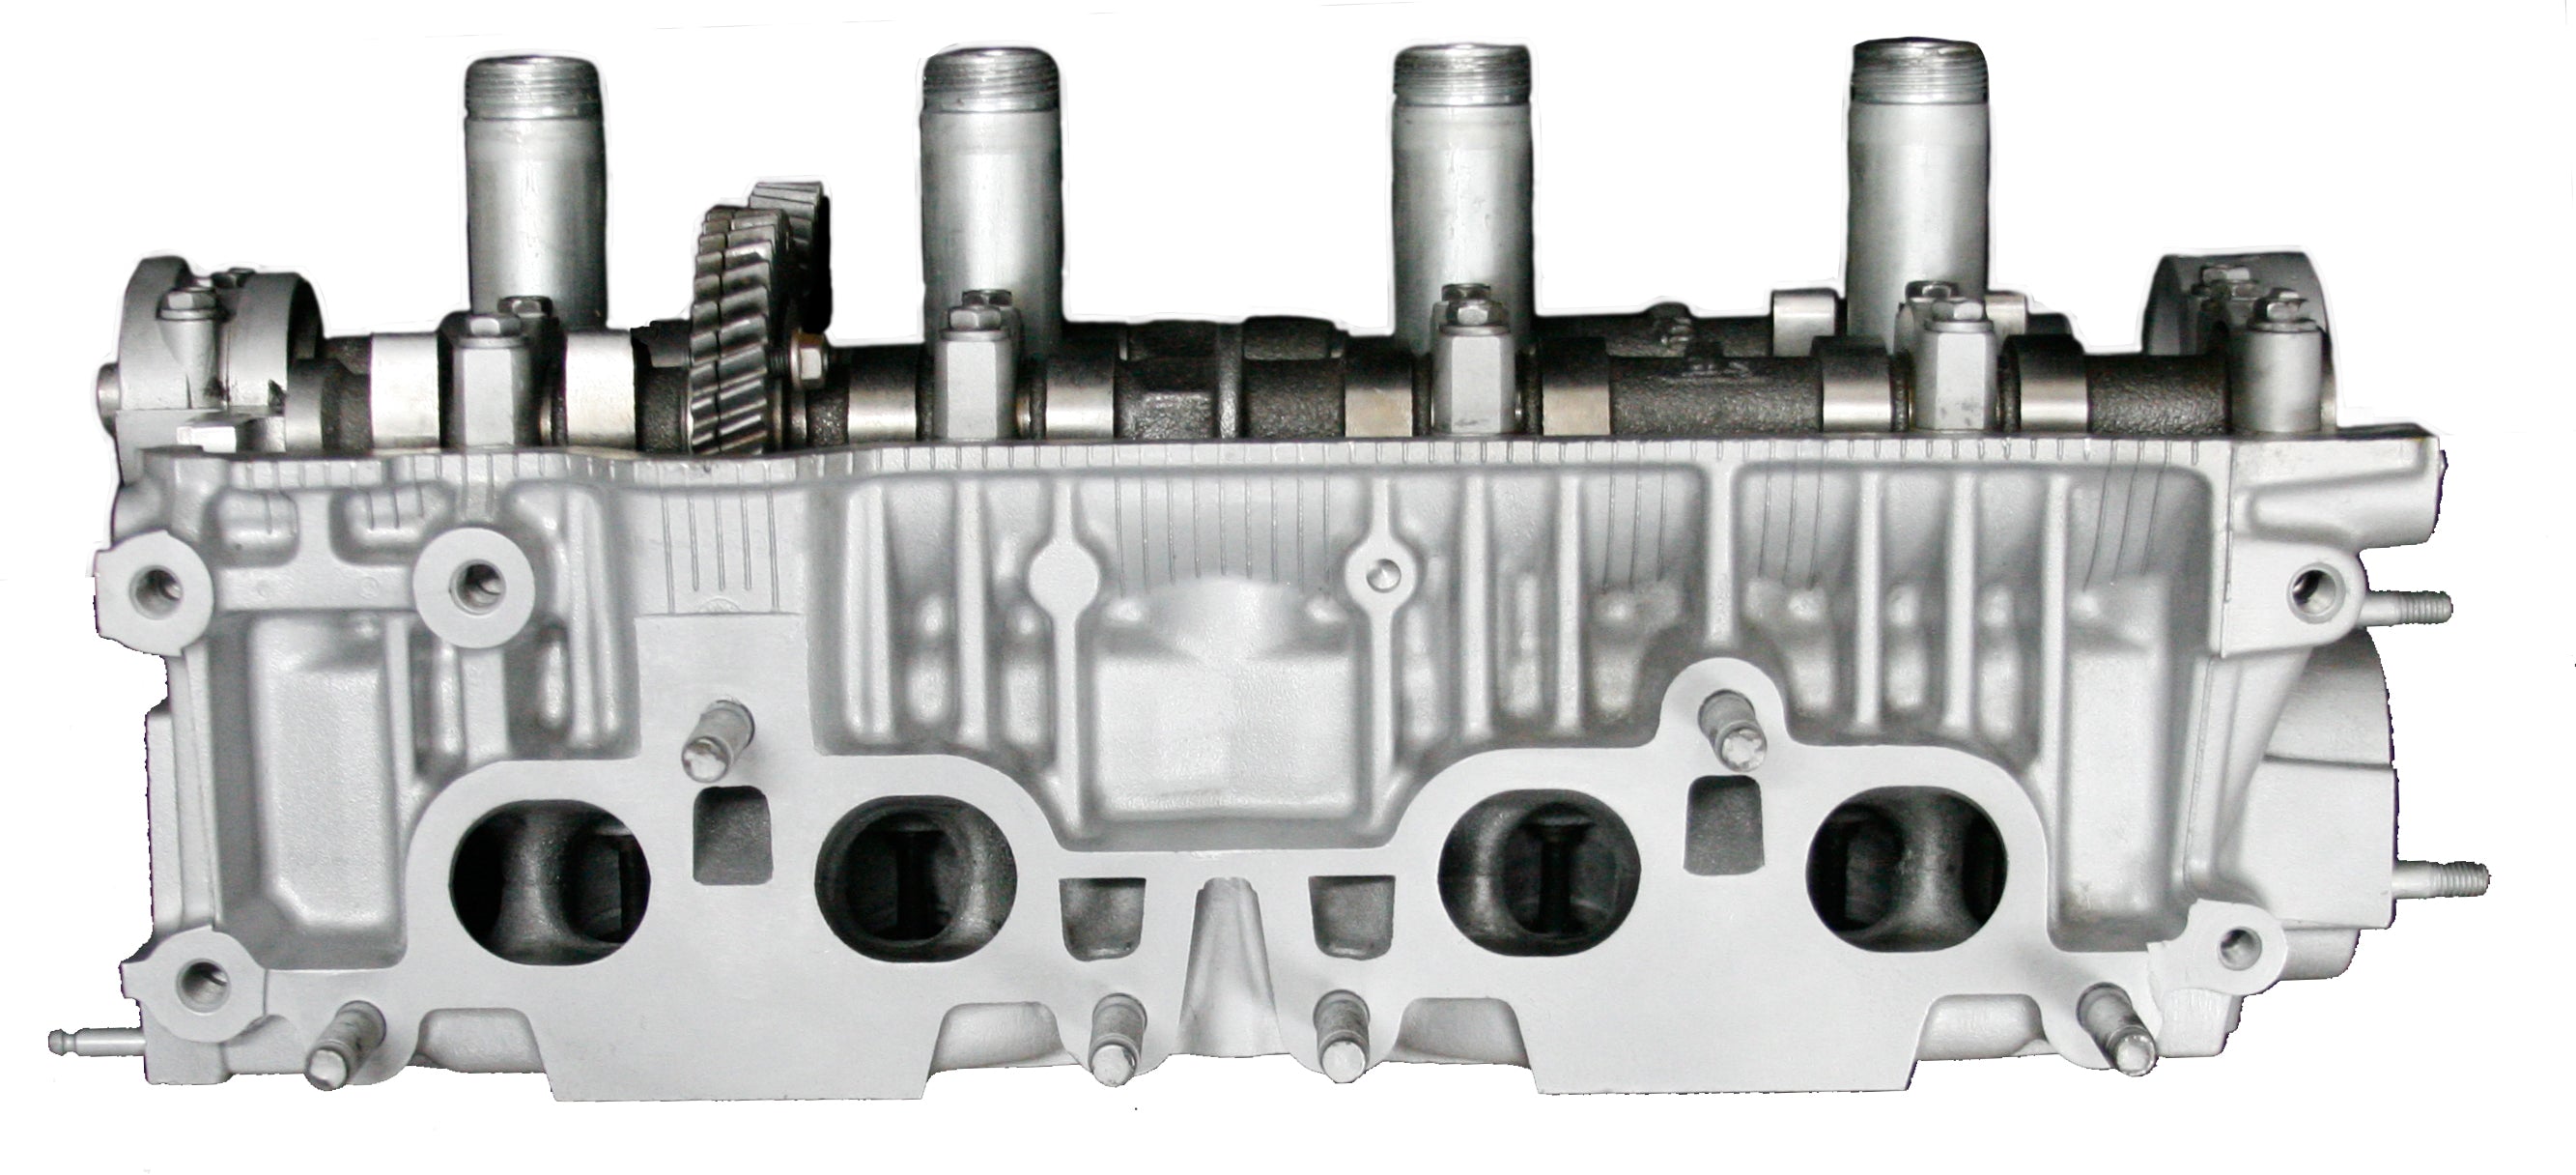 1991-1996 Toyota Camry Celica MR2 2.2L DOHC 5SFE Cylinder head casting # 70 or #38